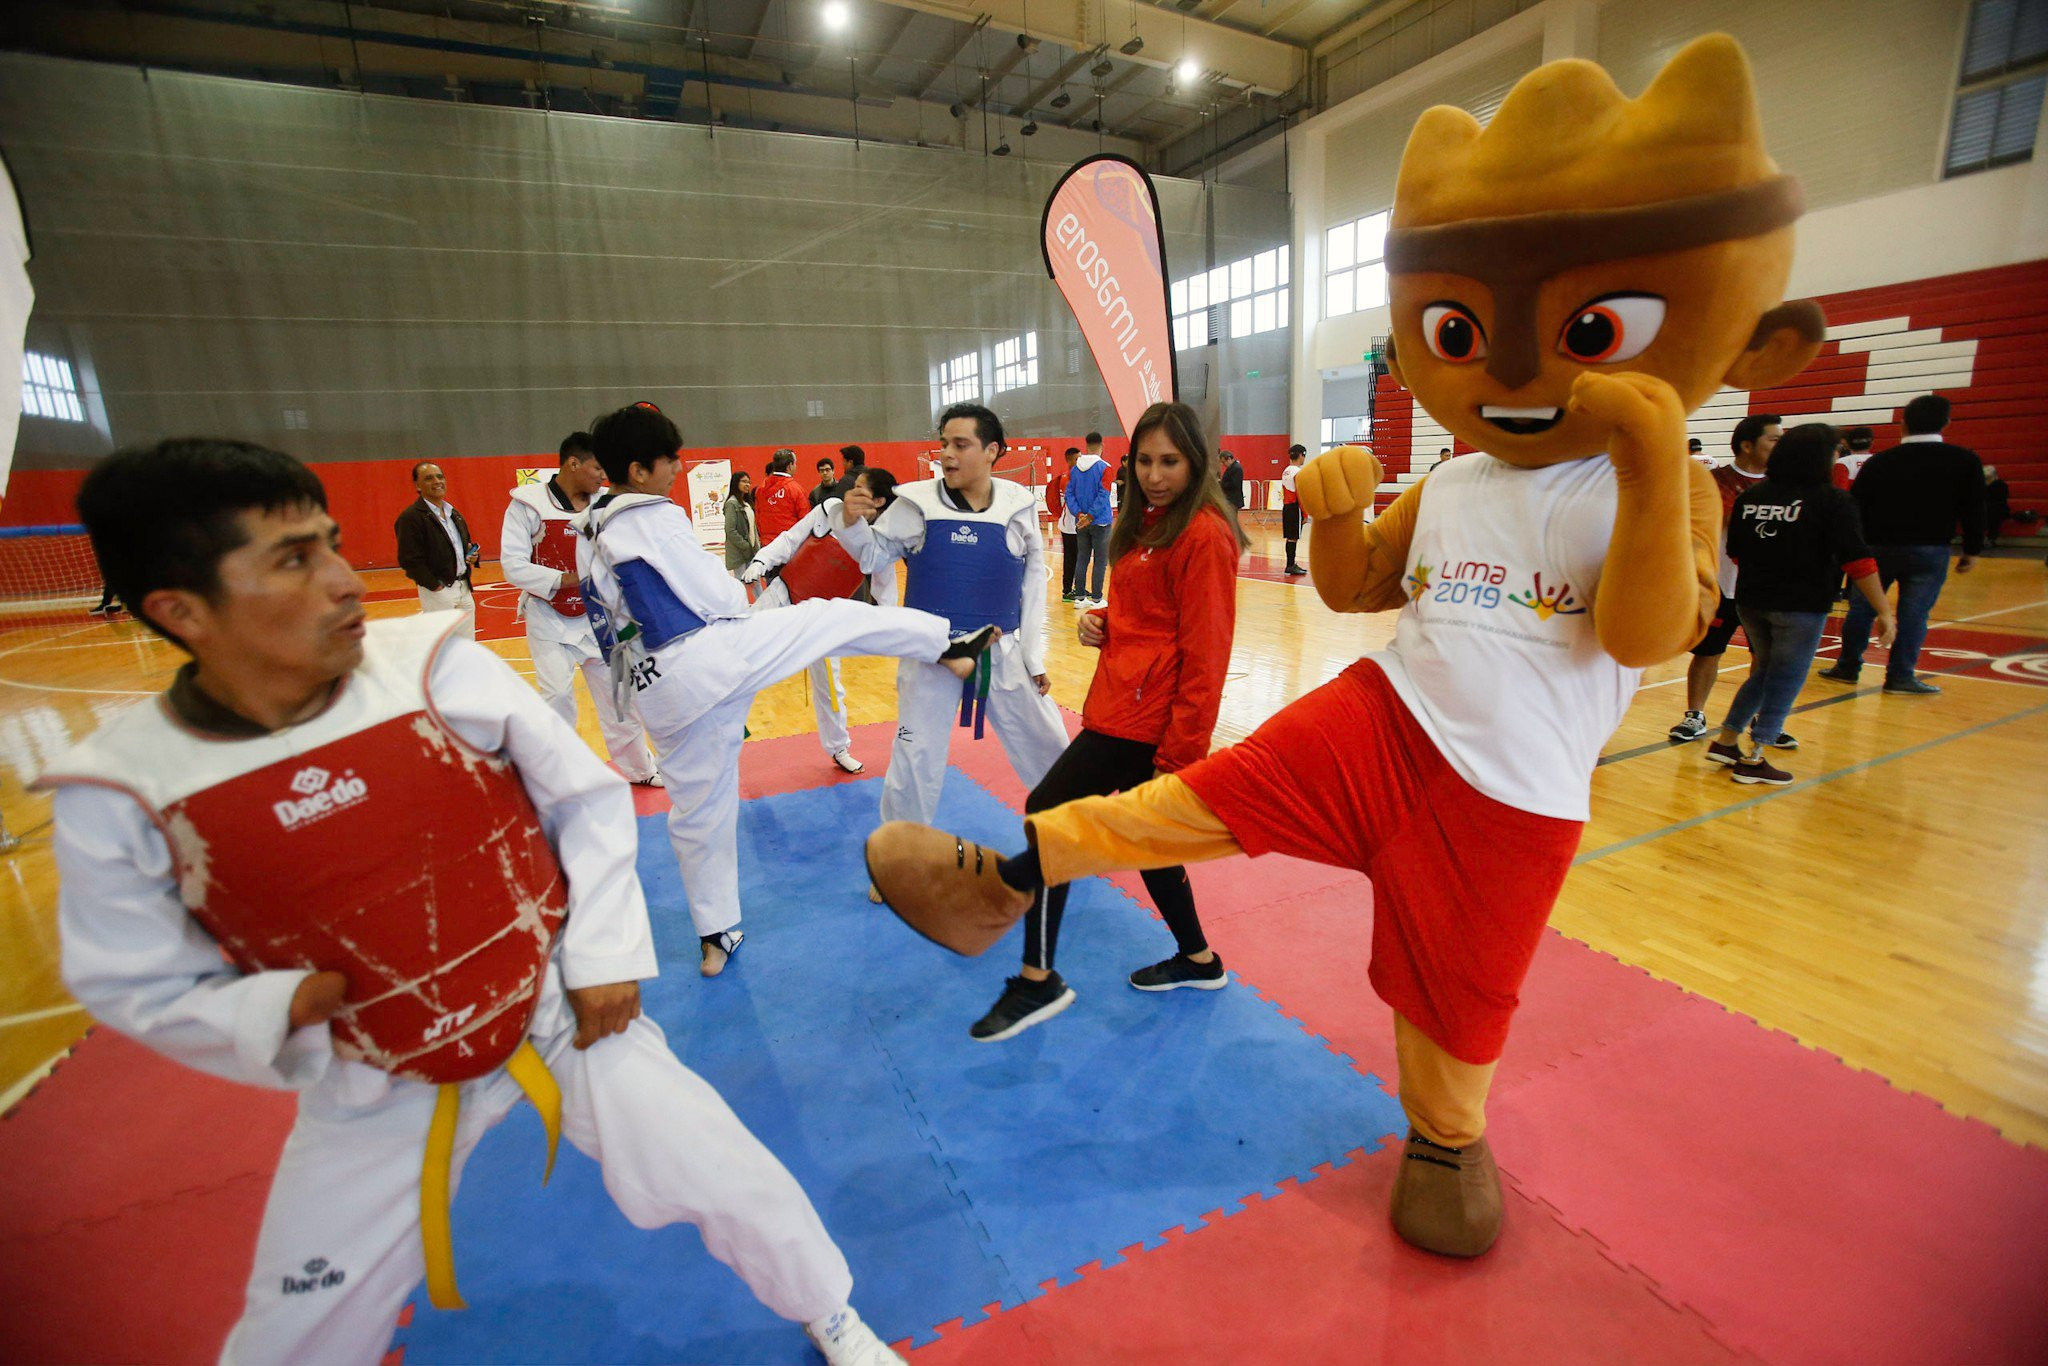 Lima 2019 host sporting event to mark one year to Parapan American Games 